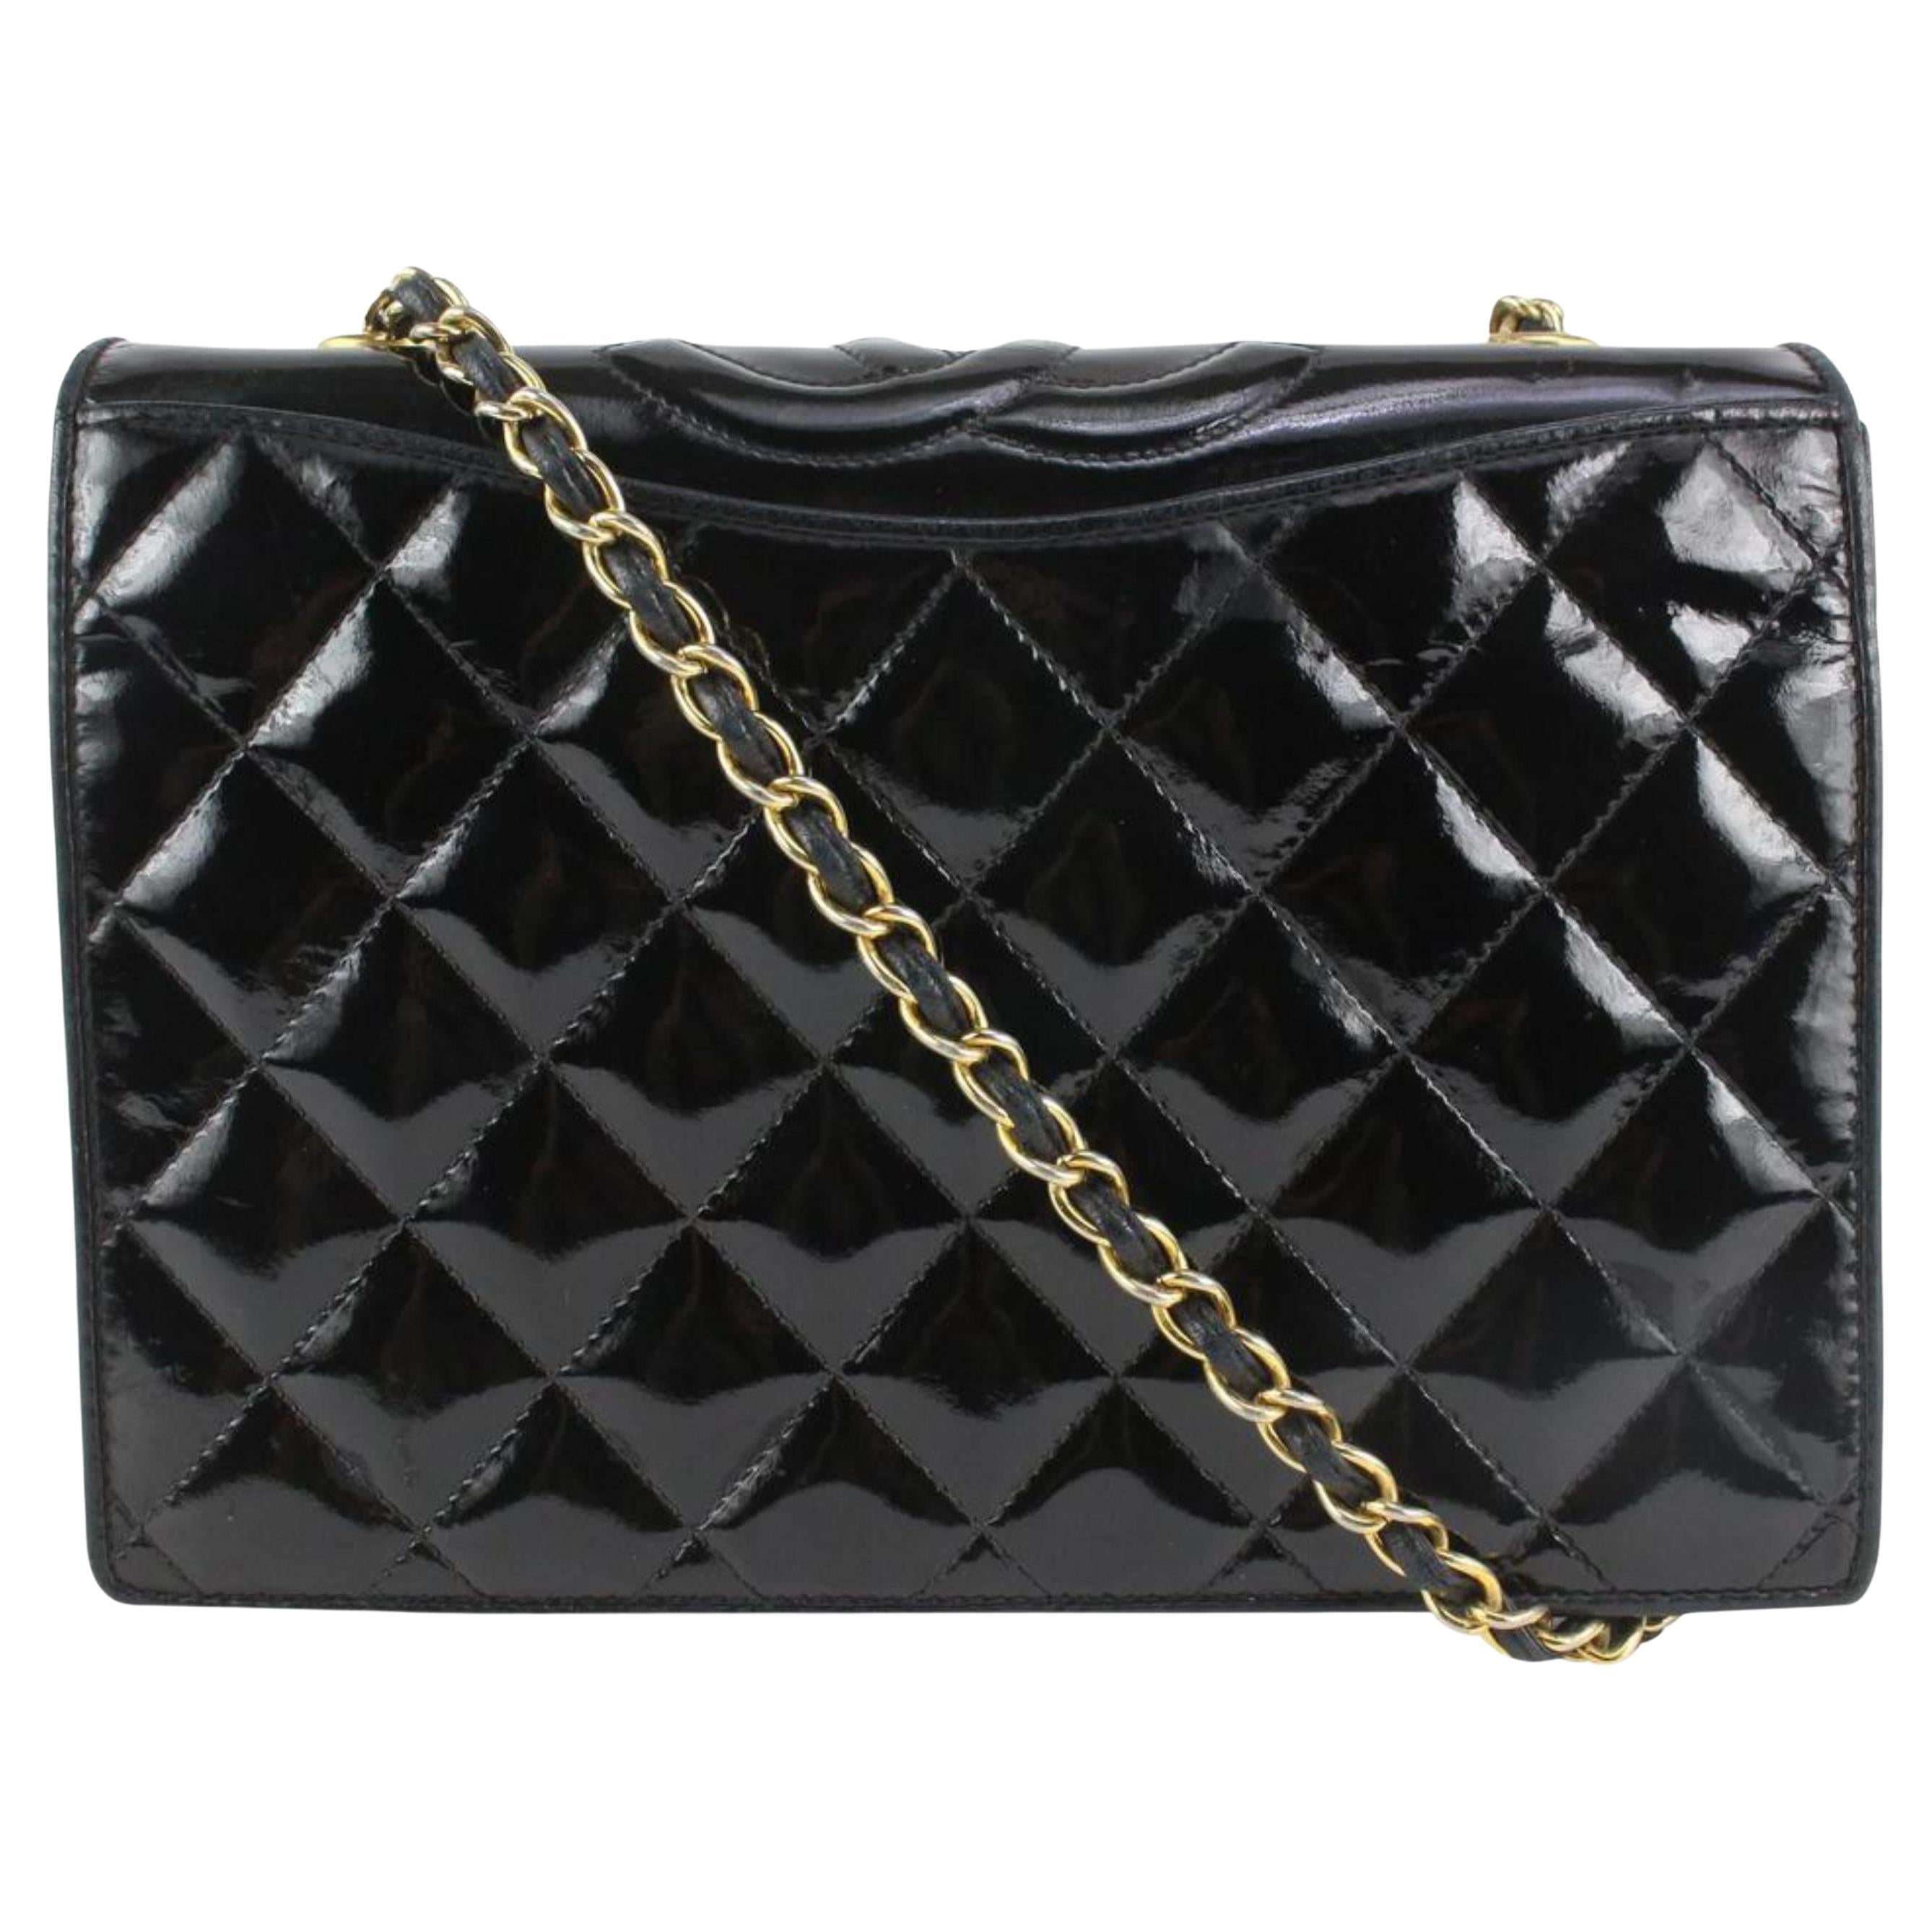 Chanel Black Quilted Patent Round Top CC Flap Bag 1215c45 For Sale